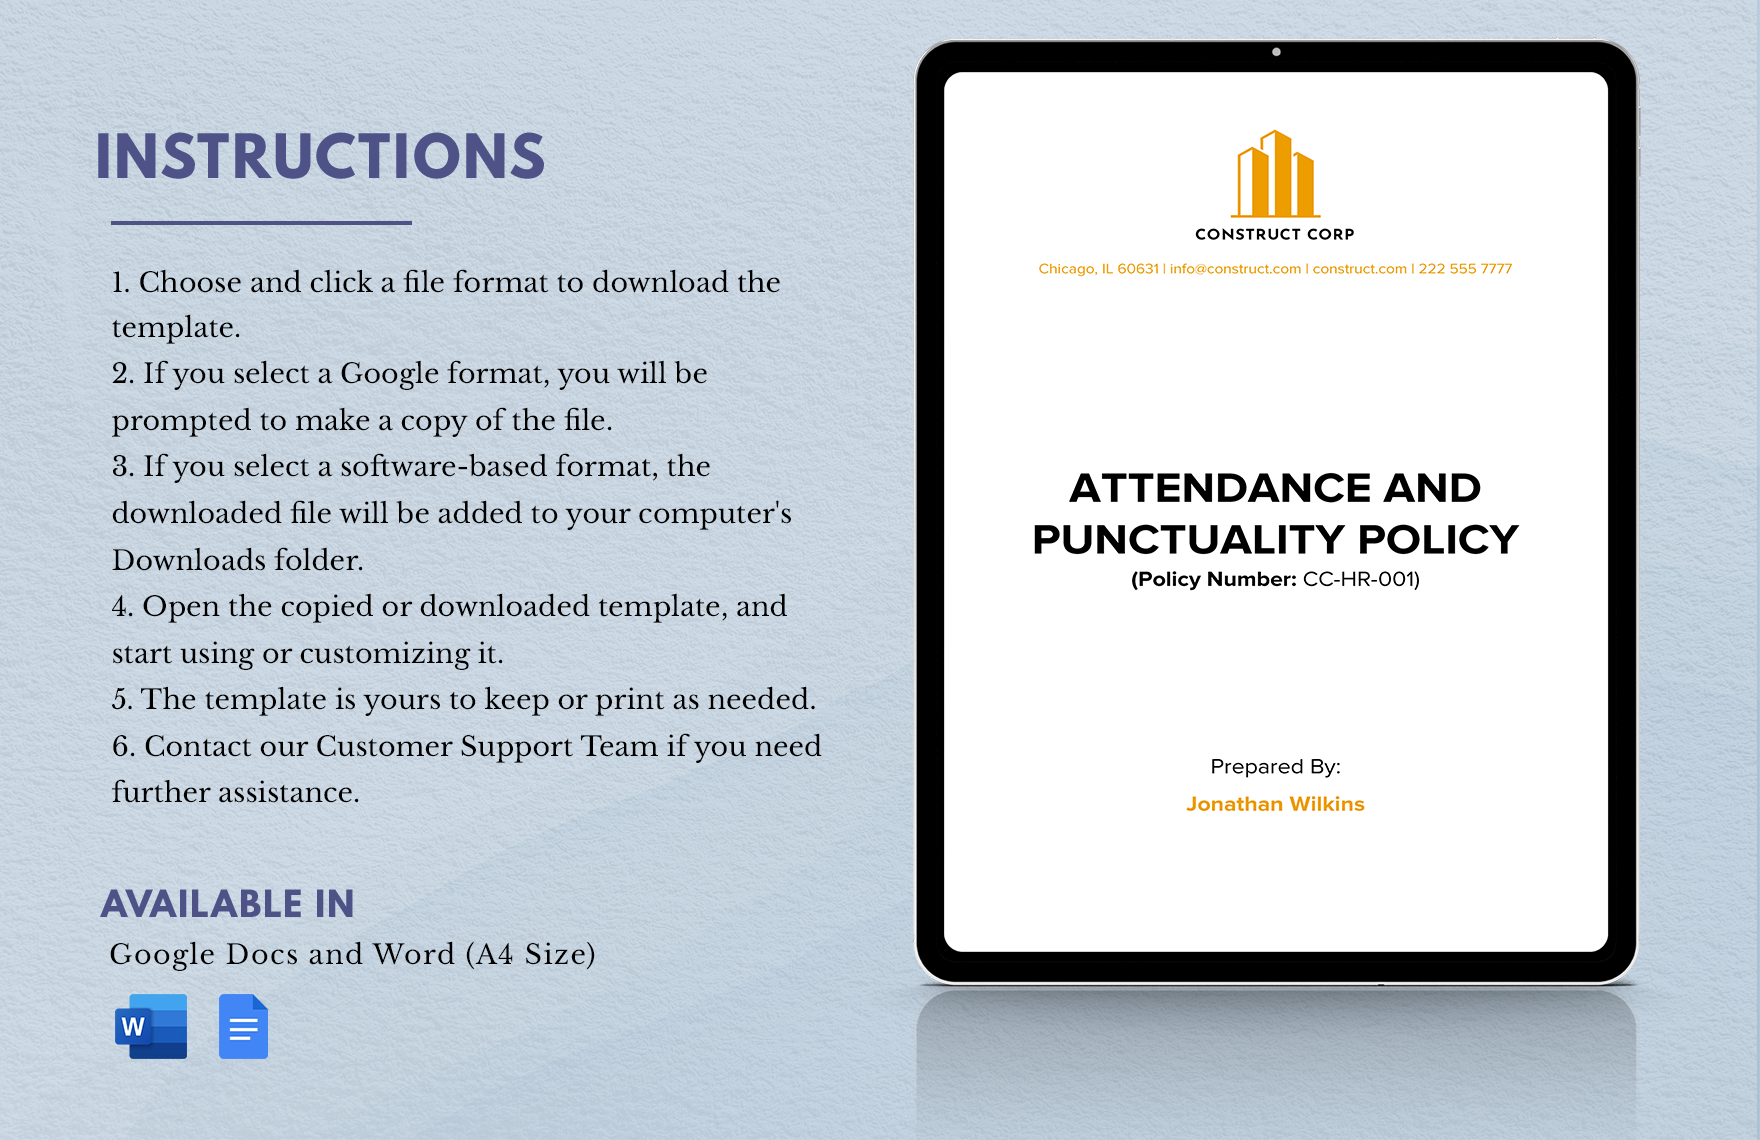 Attendance and Punctuality Policy Template